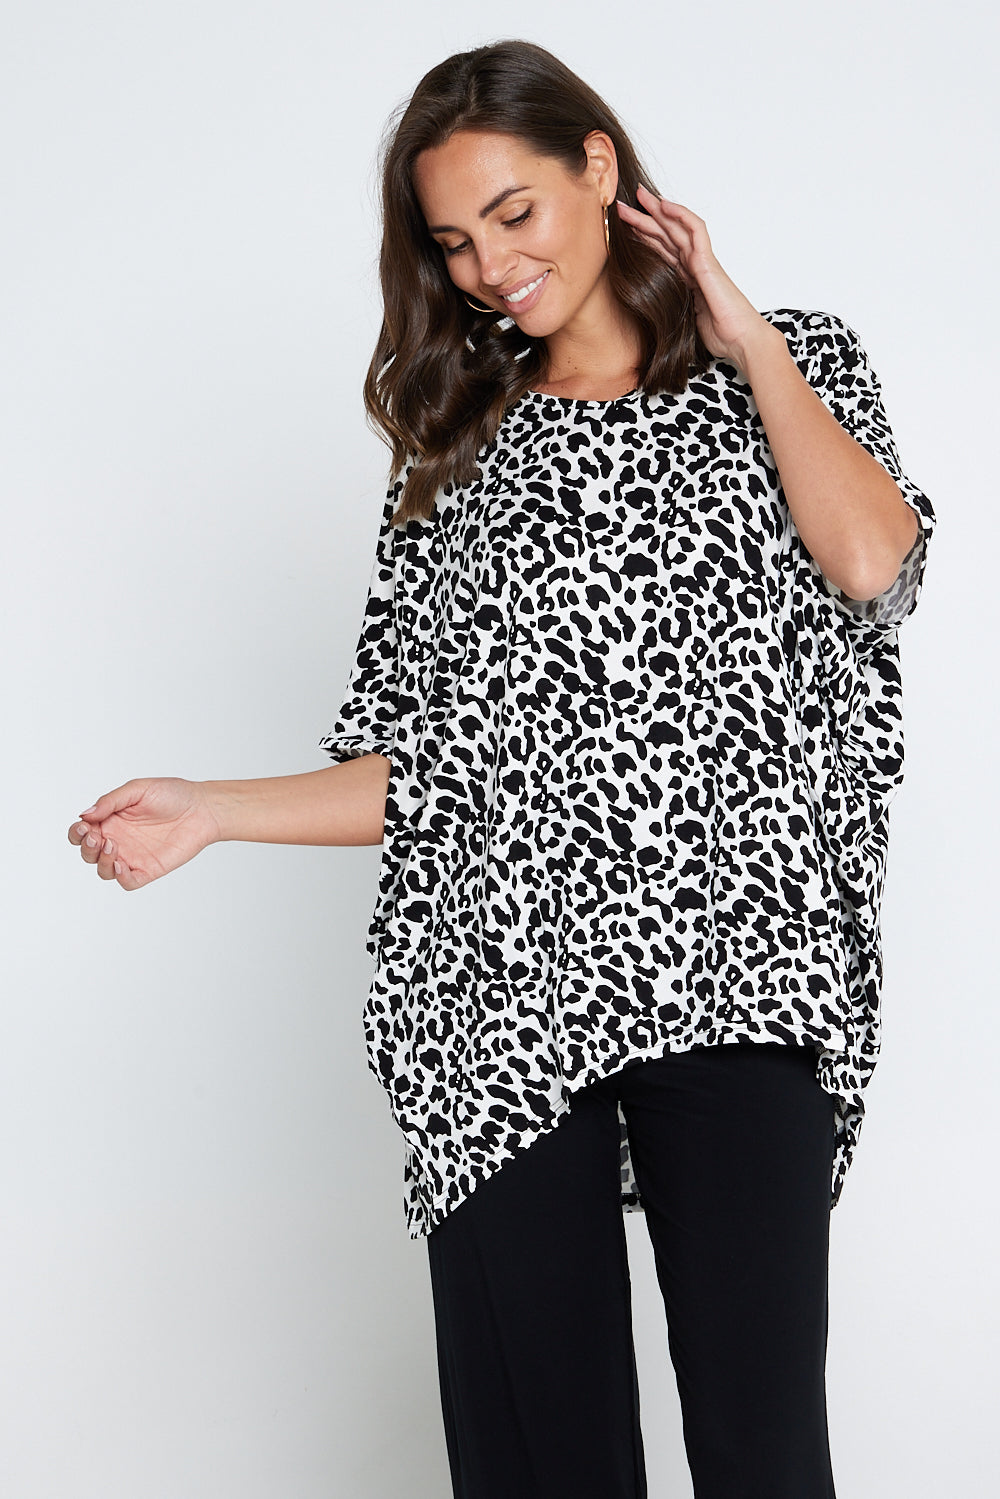 Claire Bamboo Top - Black/White Animal